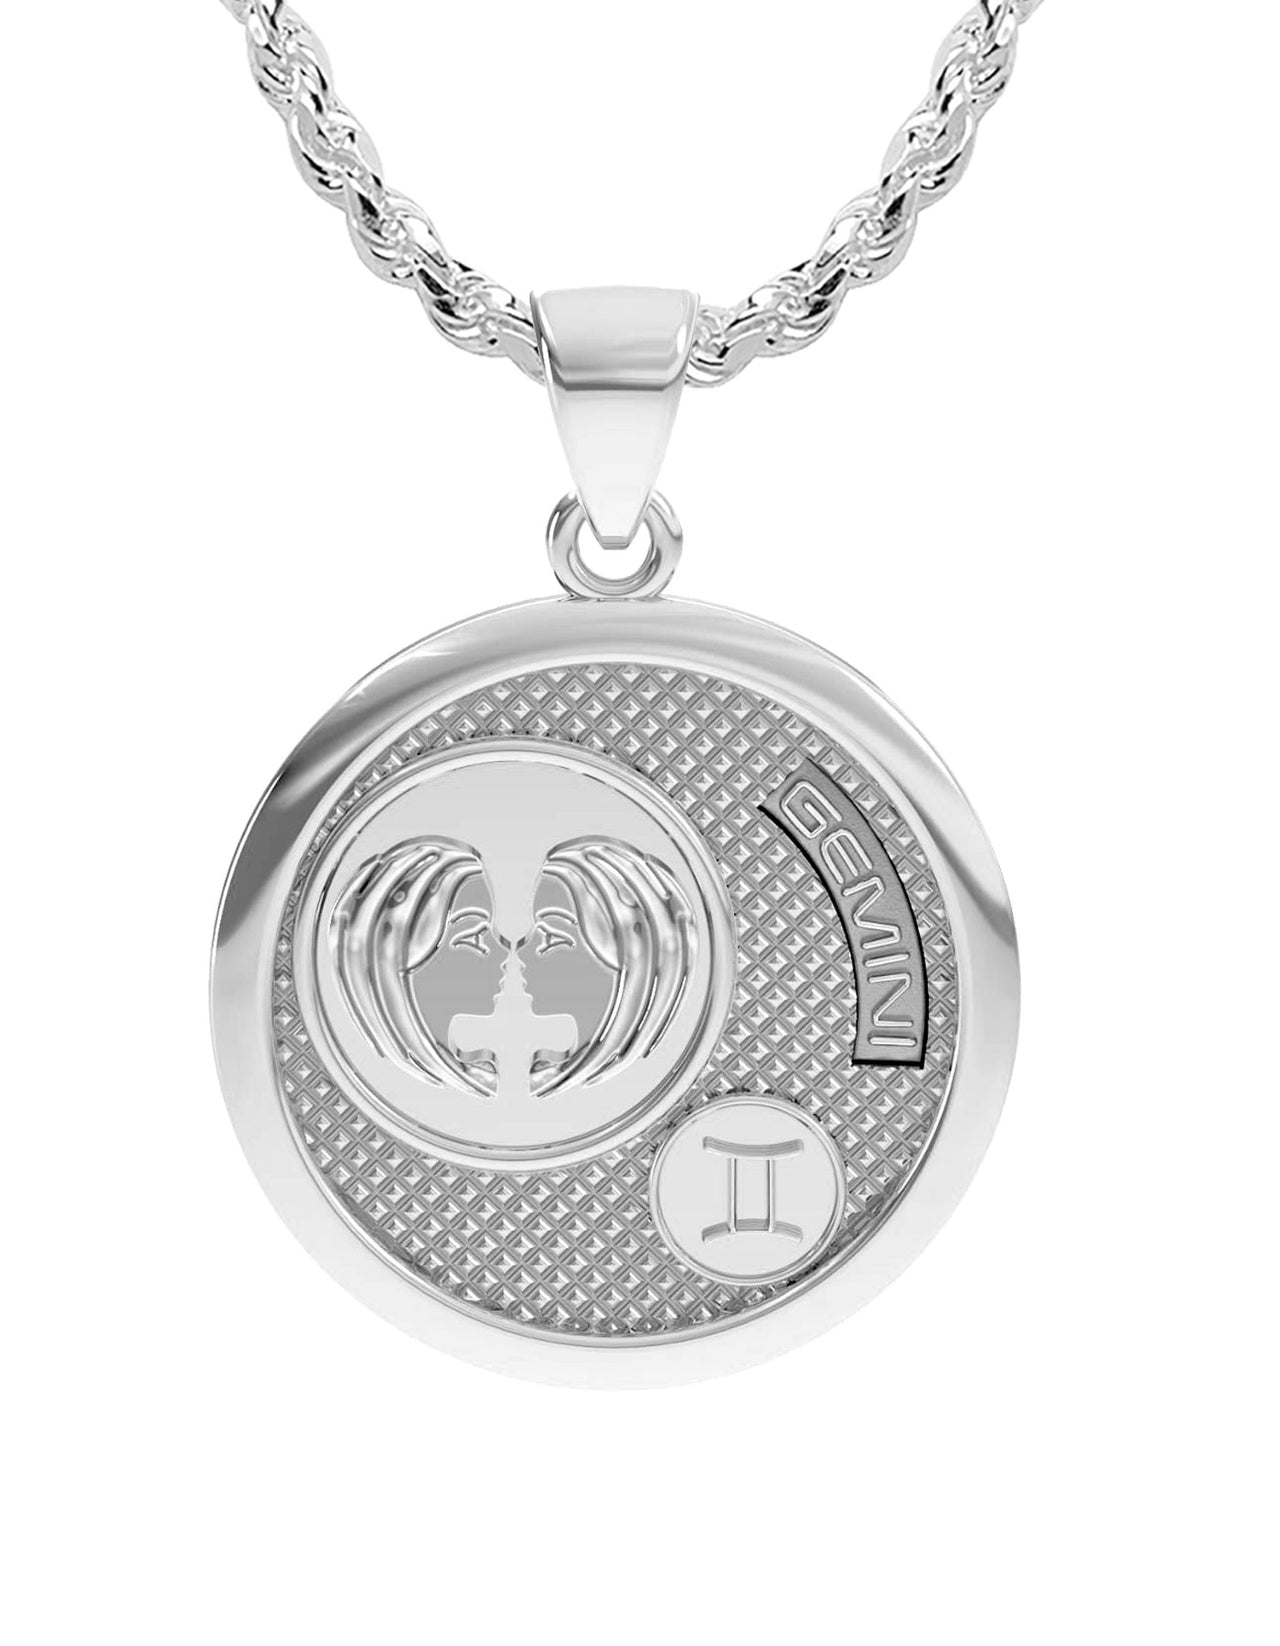 Ladies 925 Sterling Silver Round Gemini Zodiac Polished Finish Pendant Necklace, 25mm